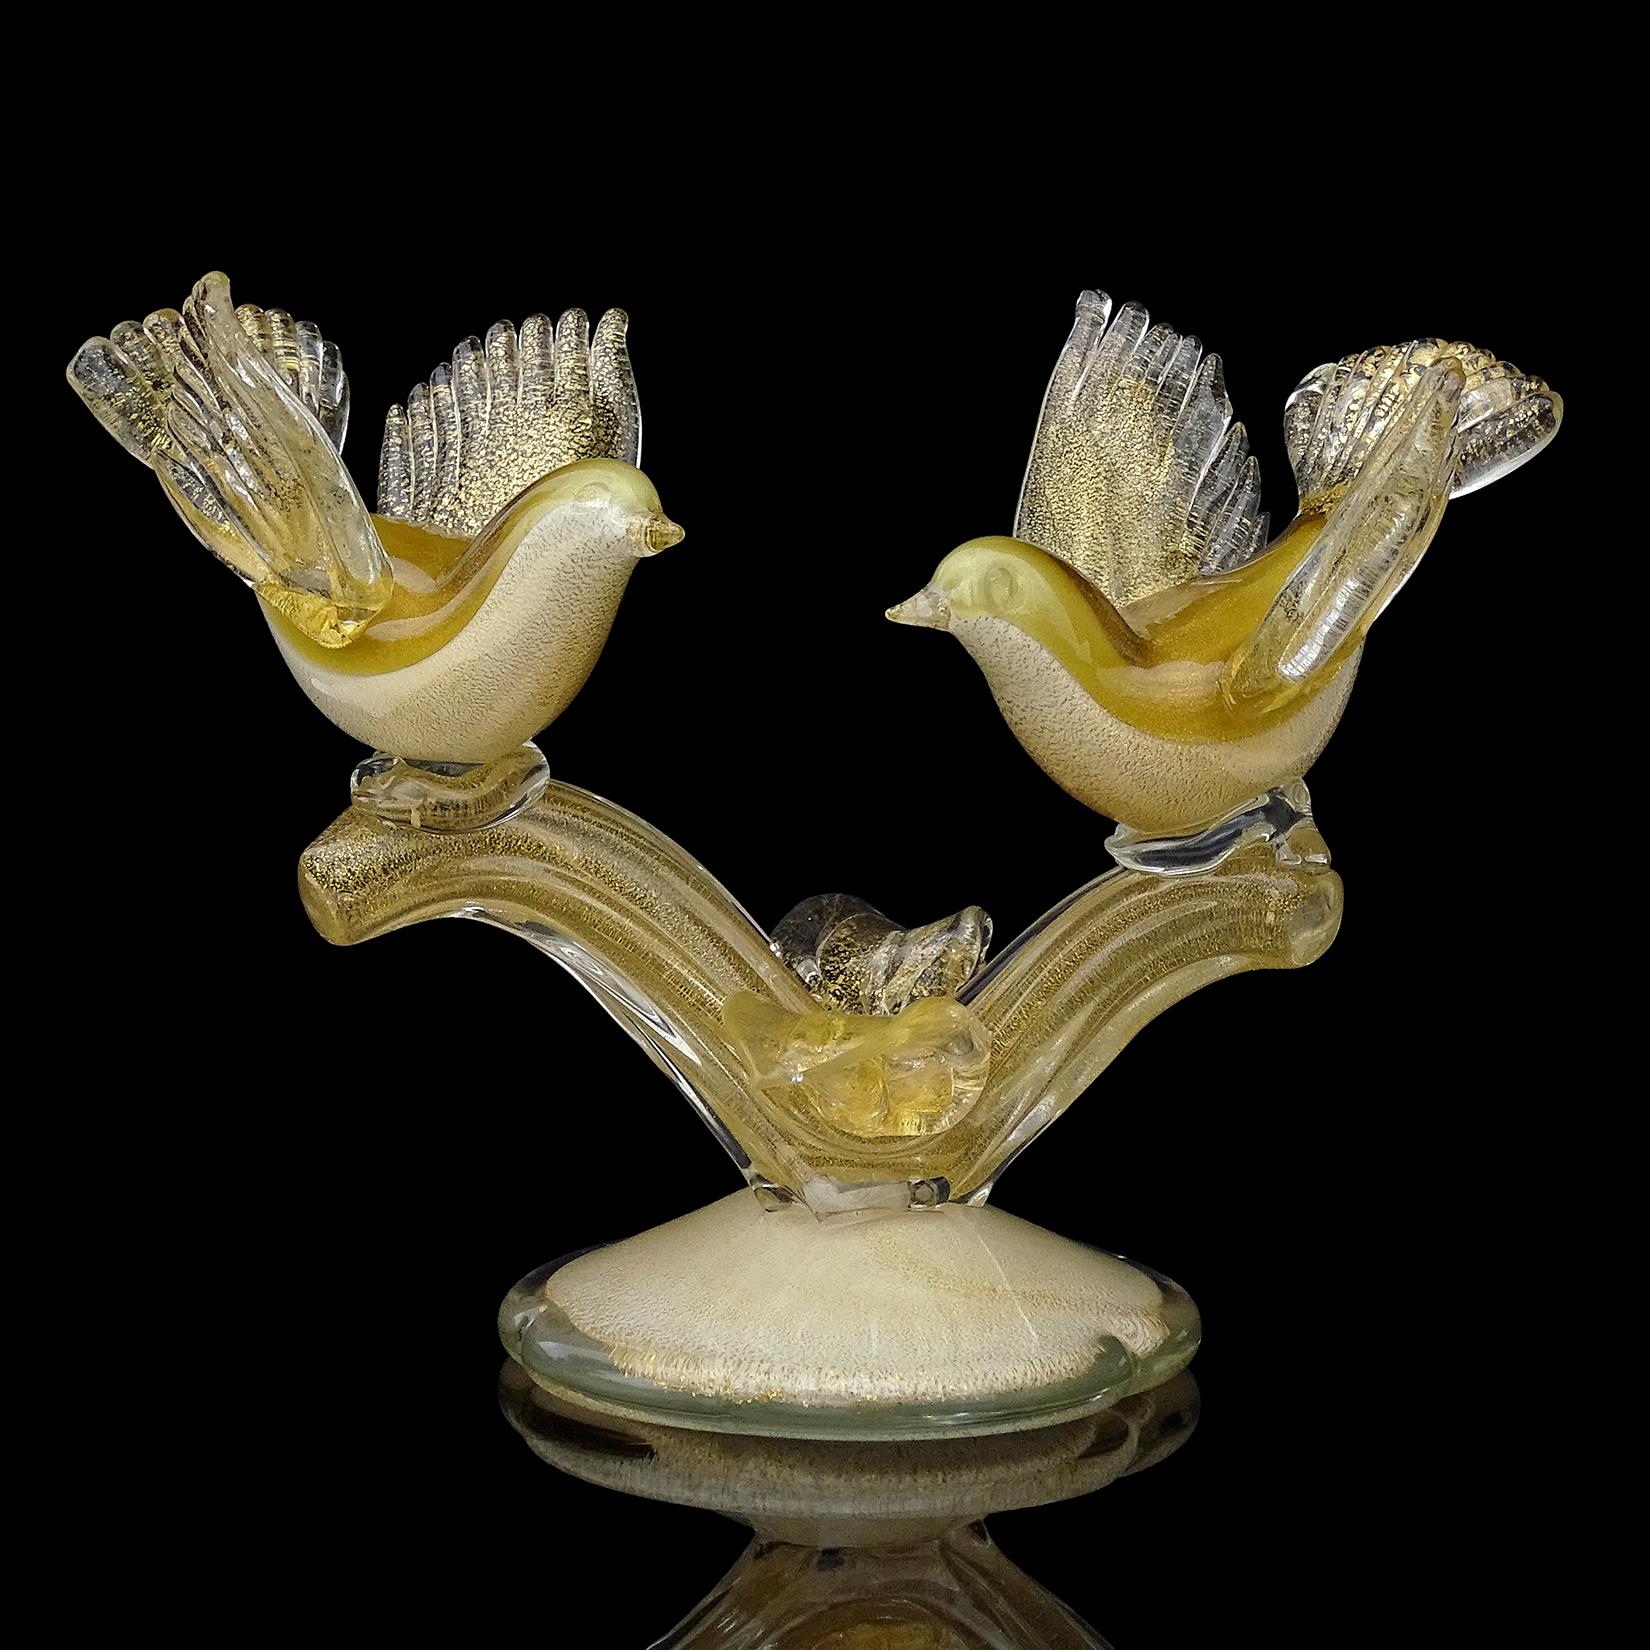 Beautiful vintage Murano hand blown white, olive green and gold flecks Italian art glass birds on branch sculpture. Documented to designer Alfredo Barbini, circa 1950s. The sculpture is published in his  